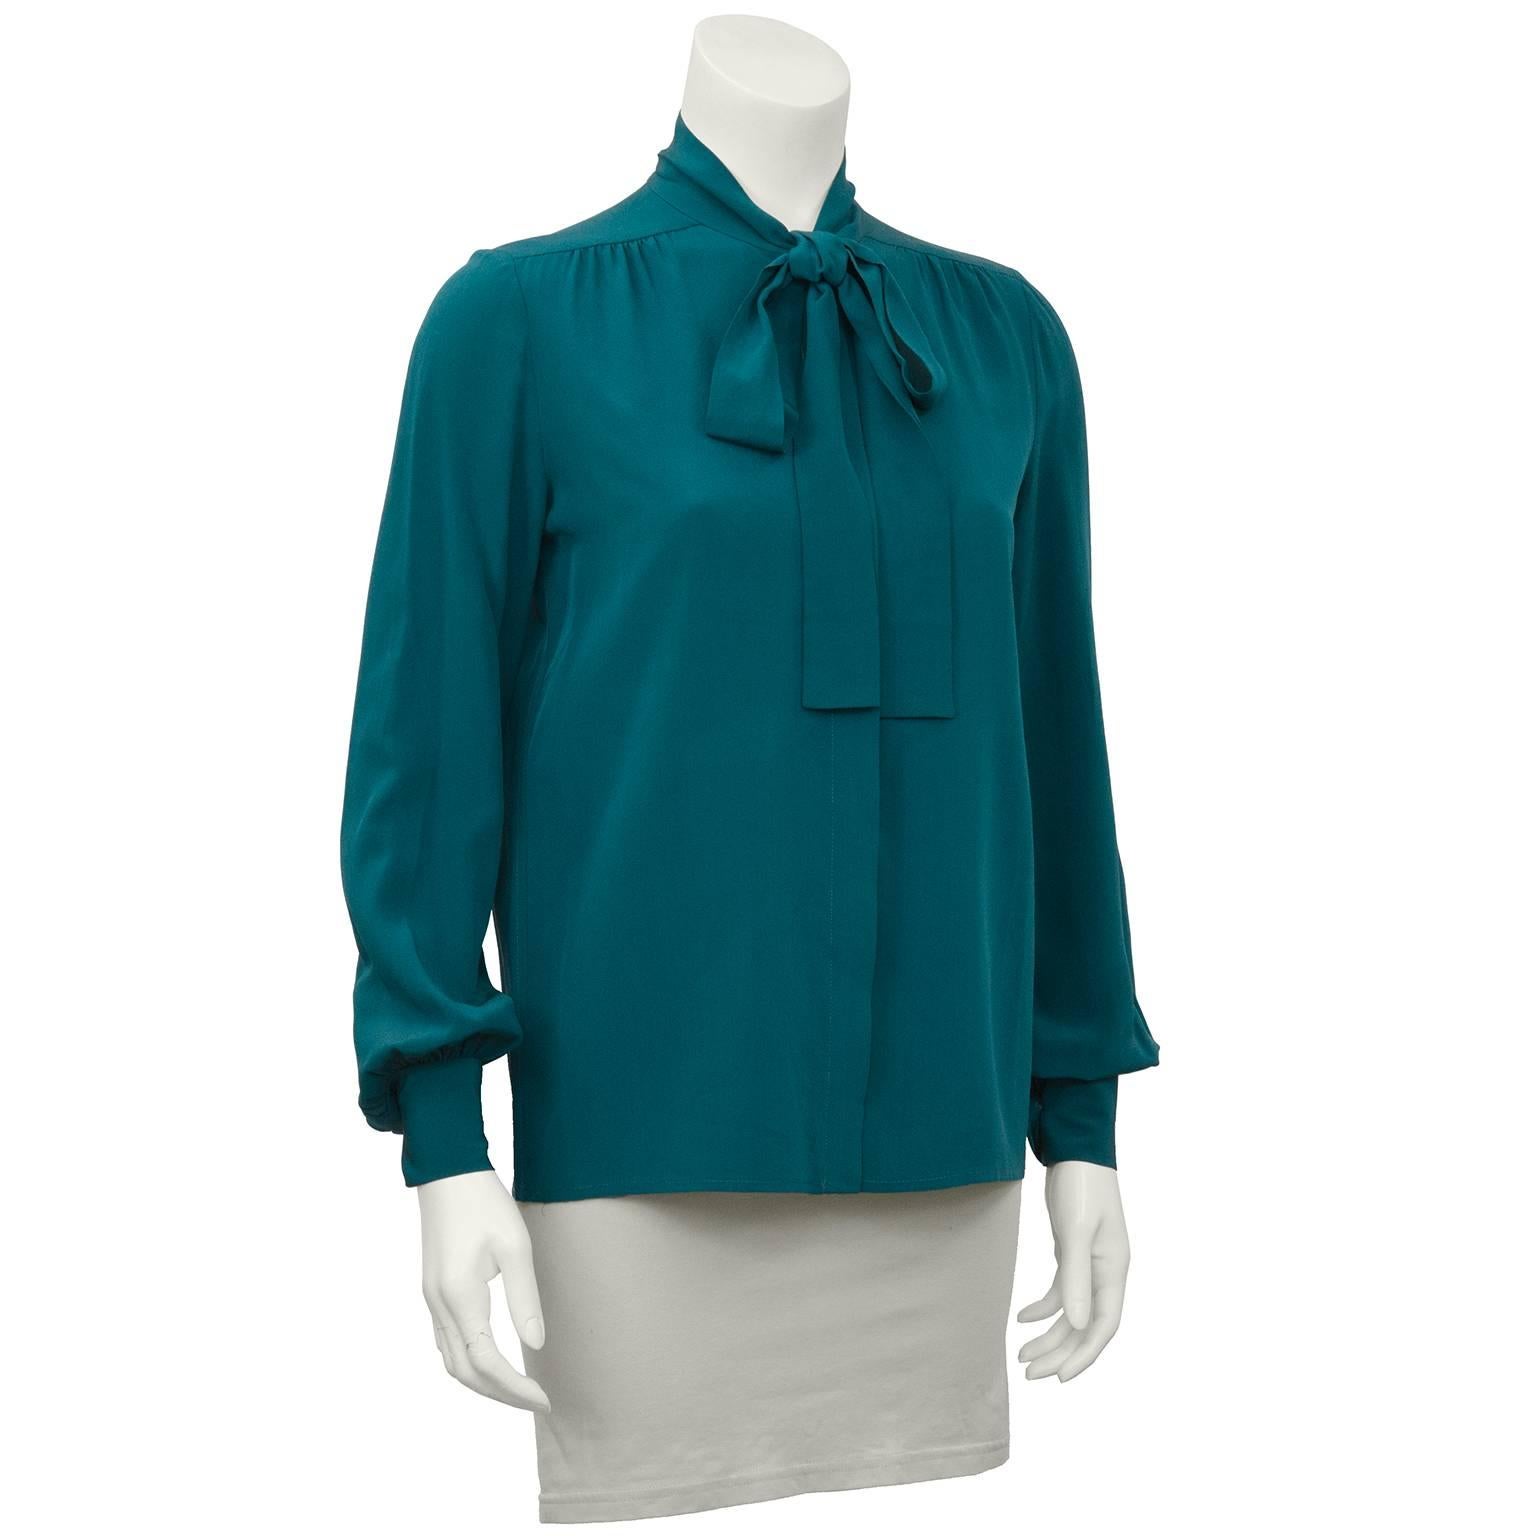 Chanel 1980's silk button front pussy bow shirt in green. Excellent condition, fits like a US size 4.

Shoulder 17